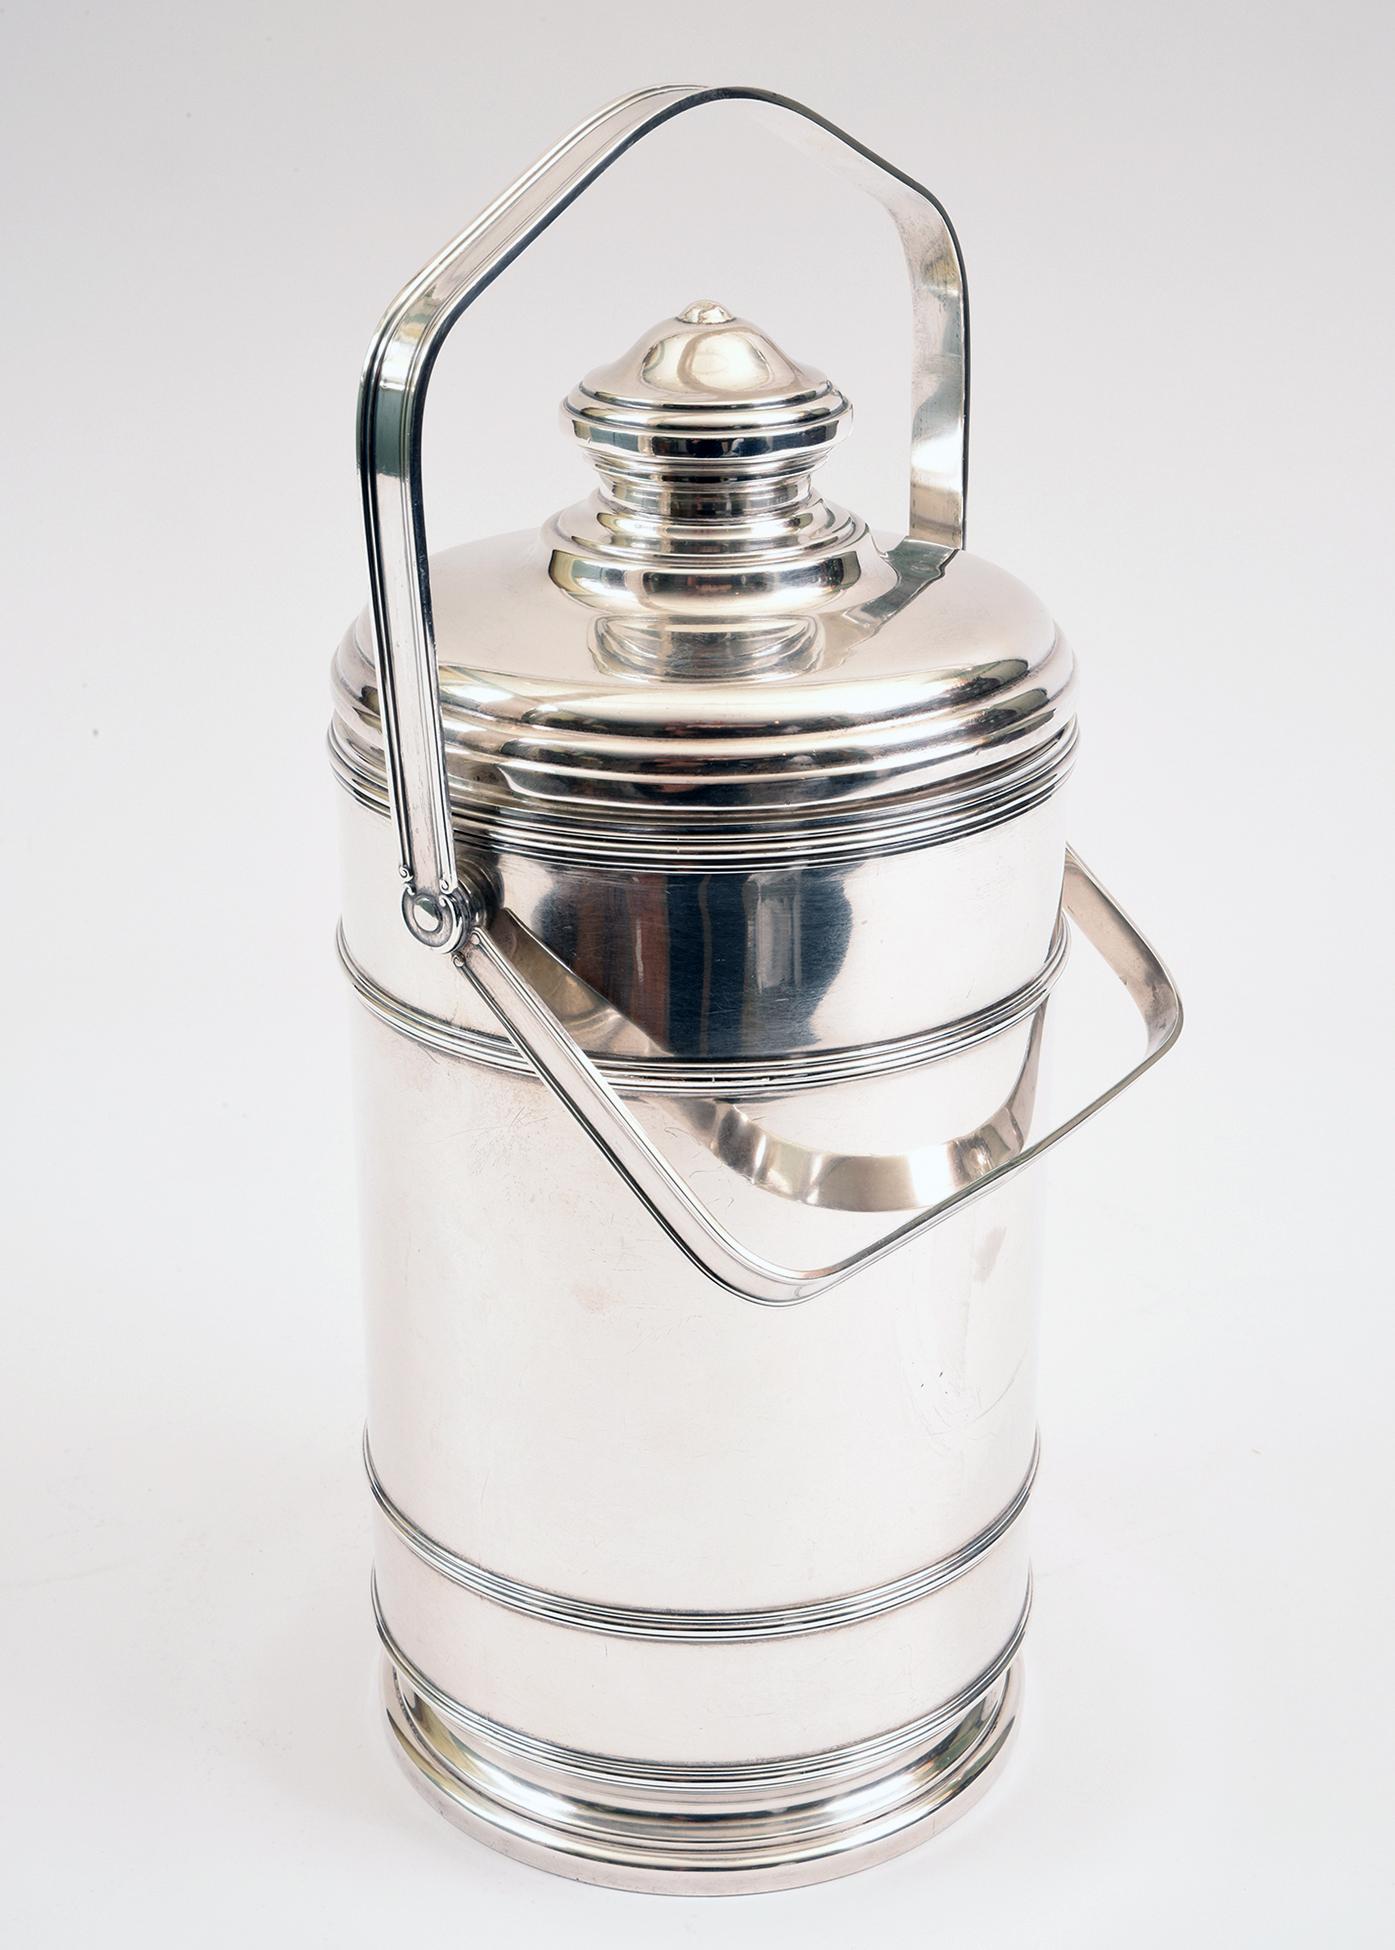 Early 20th century sterling silver Cartier covered ice bucket with two handles .The ice bucket front engraved MELODIE with interior Pyrex liner. The sterling silver ice bucket is in excellent vintage condition, minor wear consistent with age / use